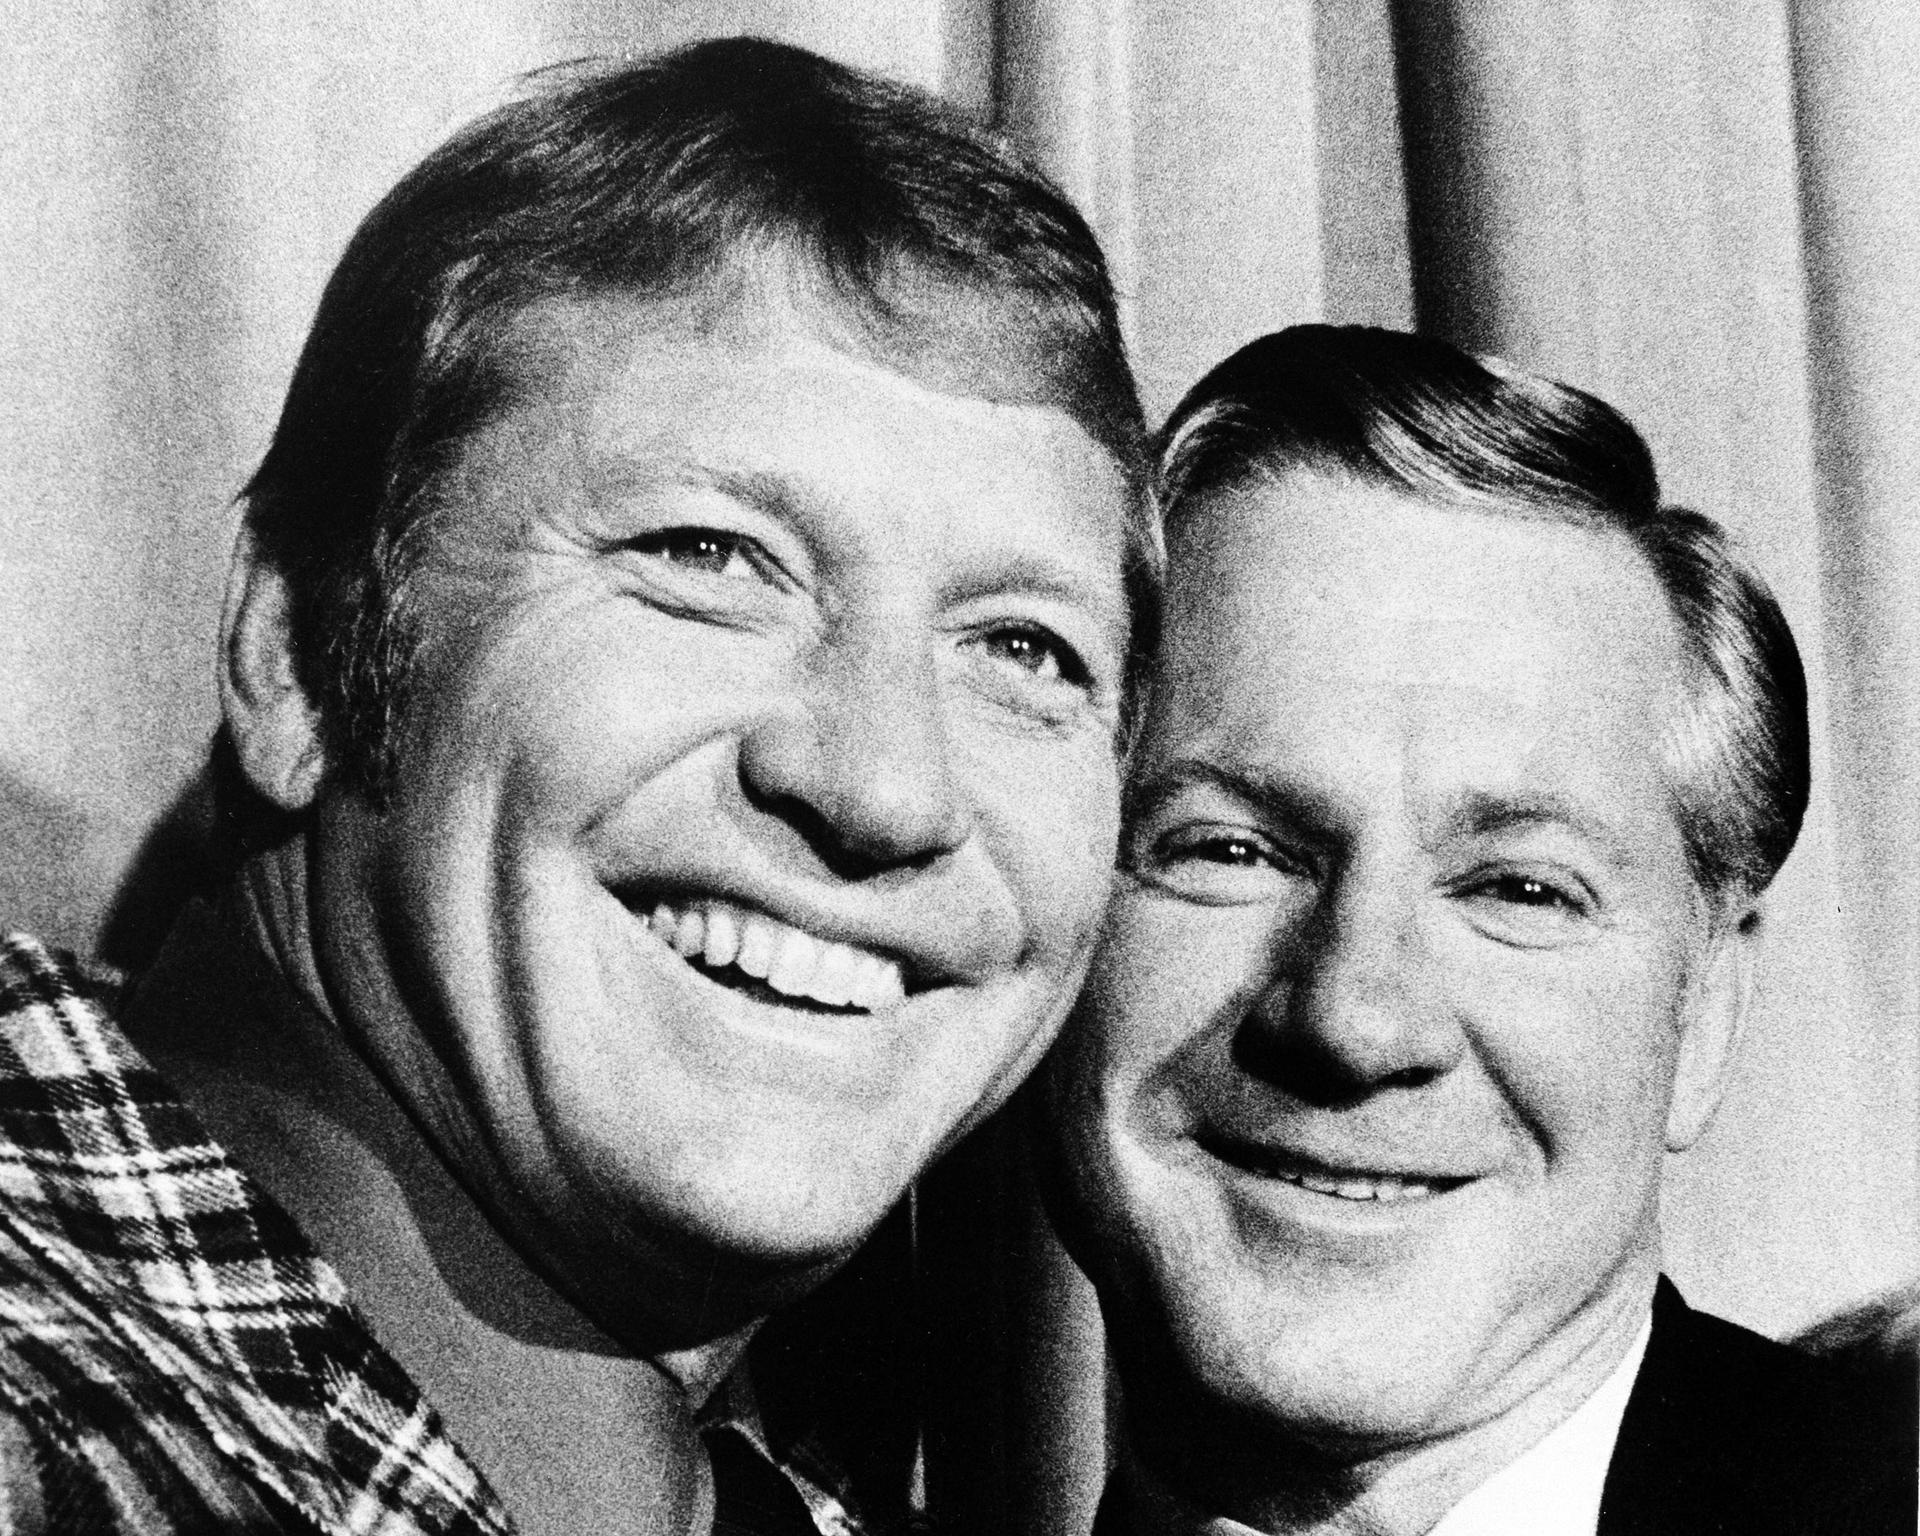 Mickey Mantle and Whitey Ford 